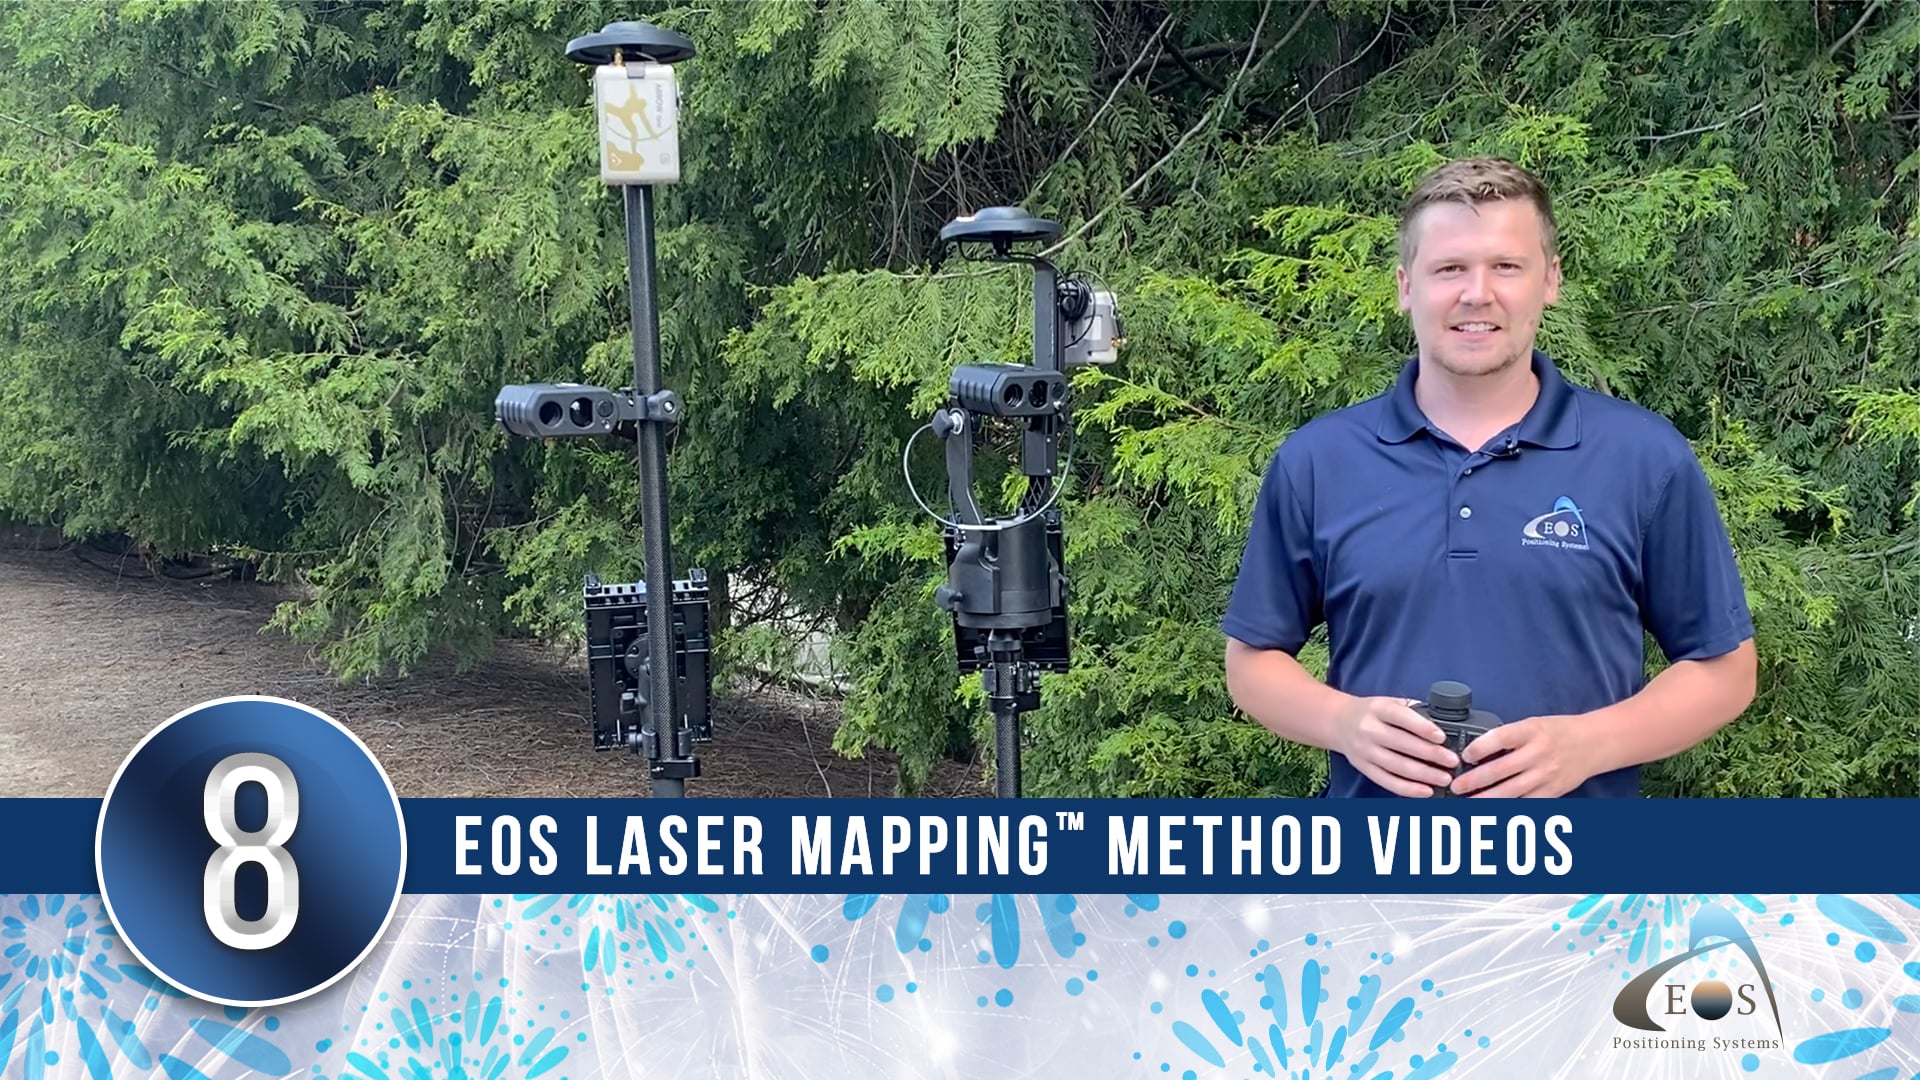 Top 10 of 2021 - 8 Eos Laser Mapping Method Videos